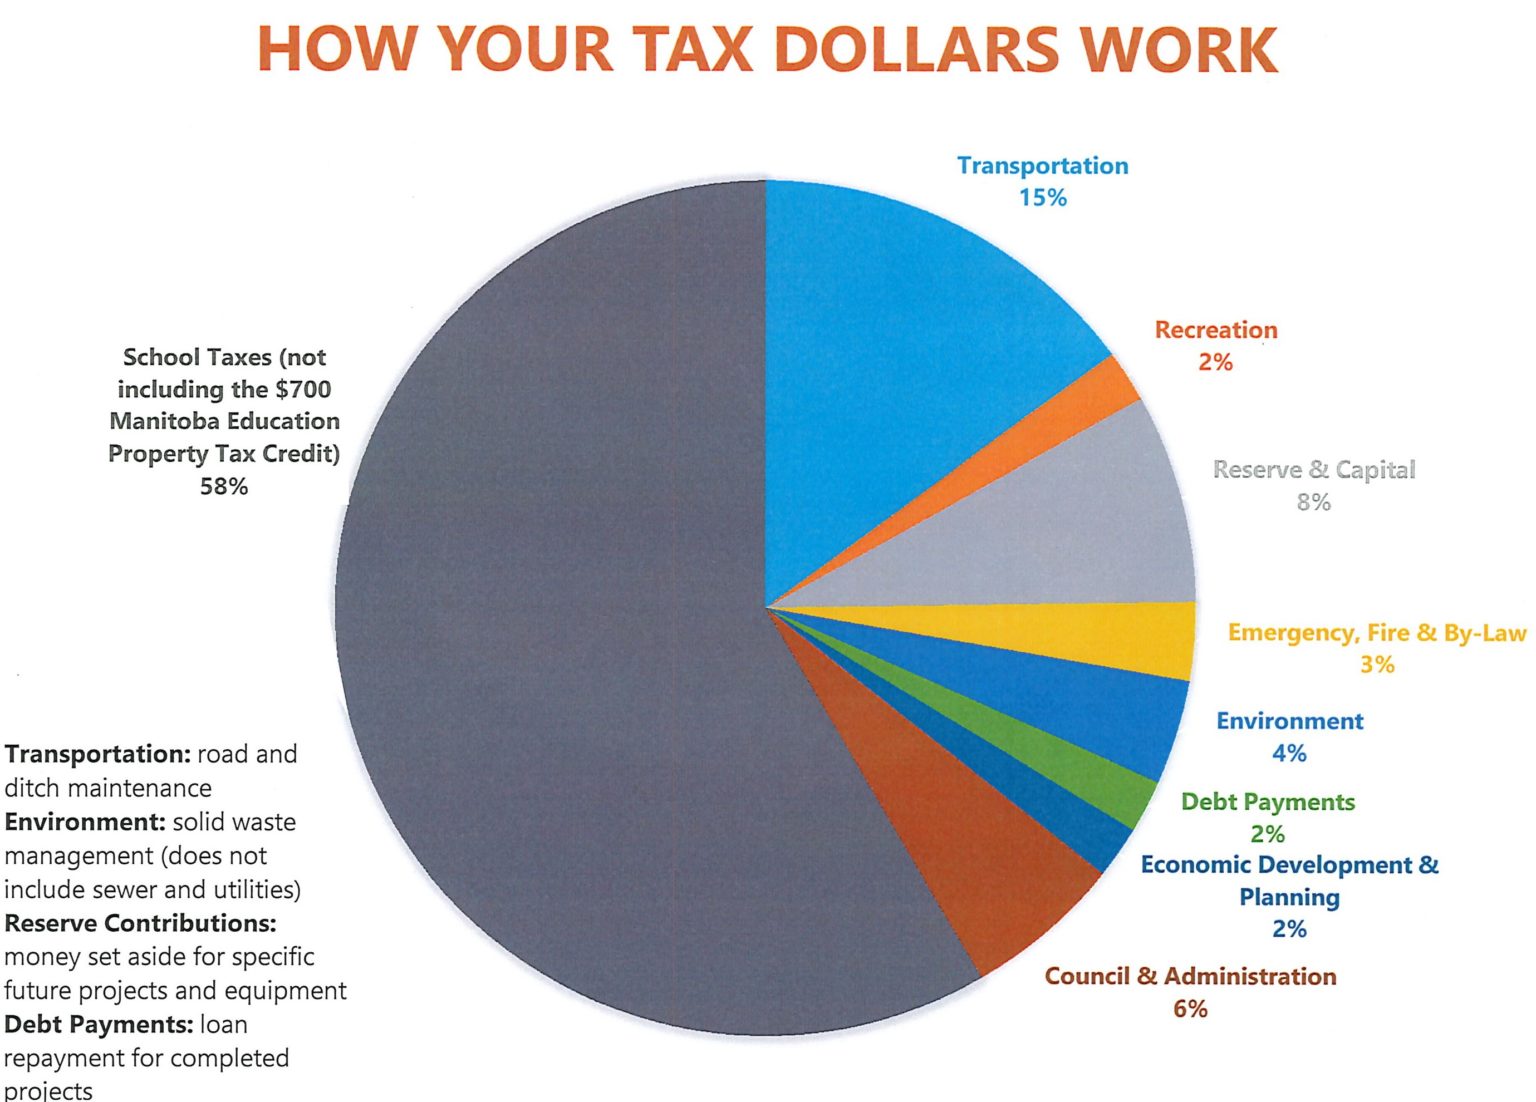 final pie chart tax dollars 2020 Rural Municipality of St. Clements